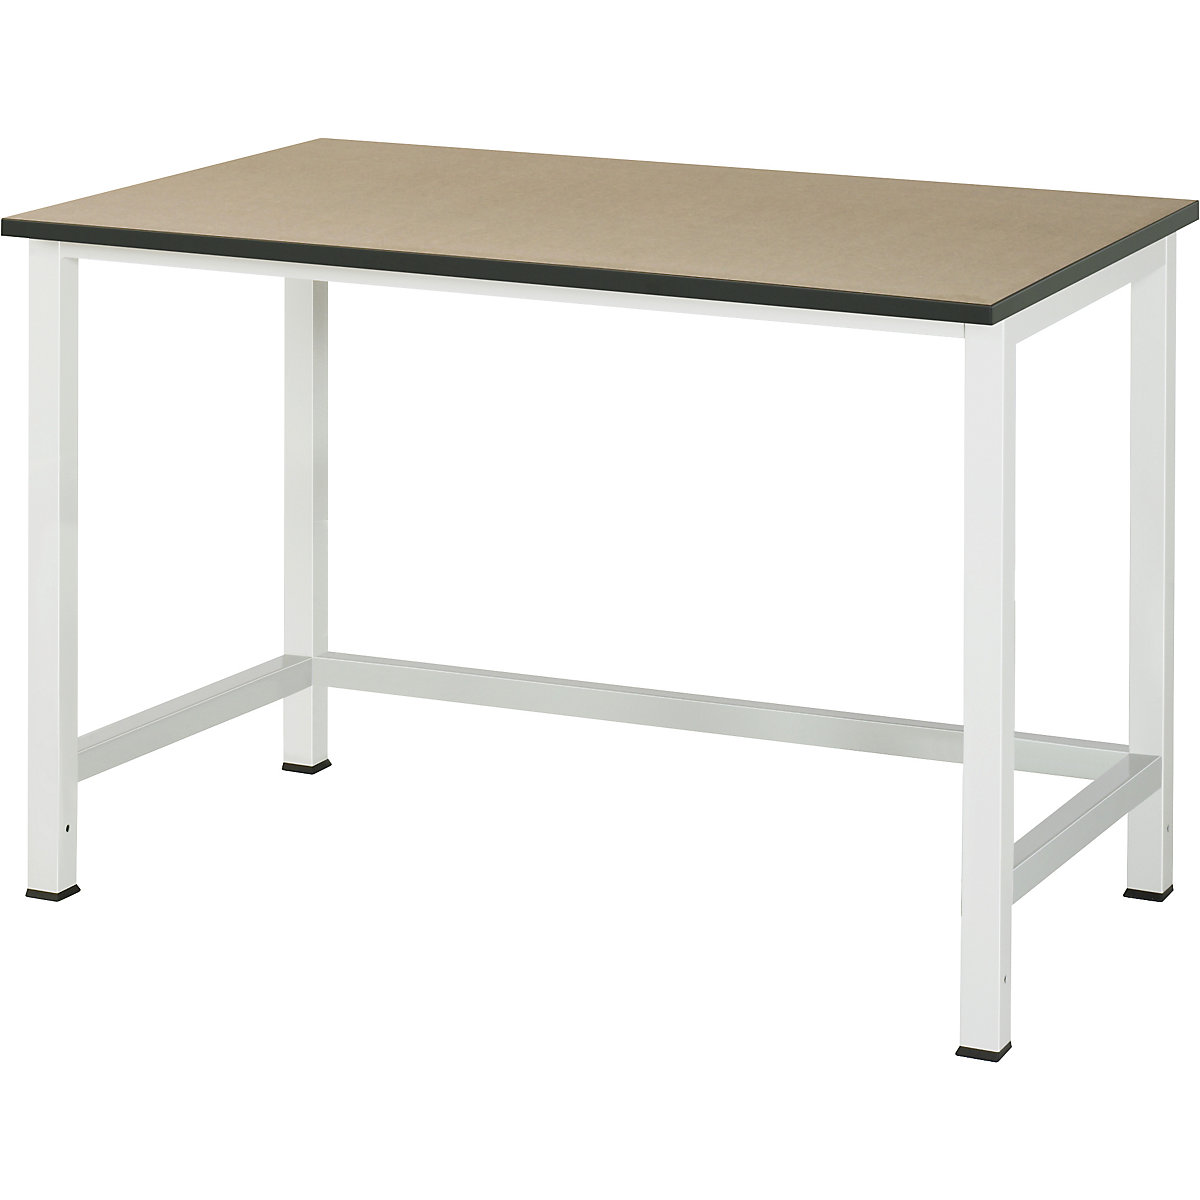 Work table for Series 900 workplace system – RAU, MDF, width 1250 mm-5